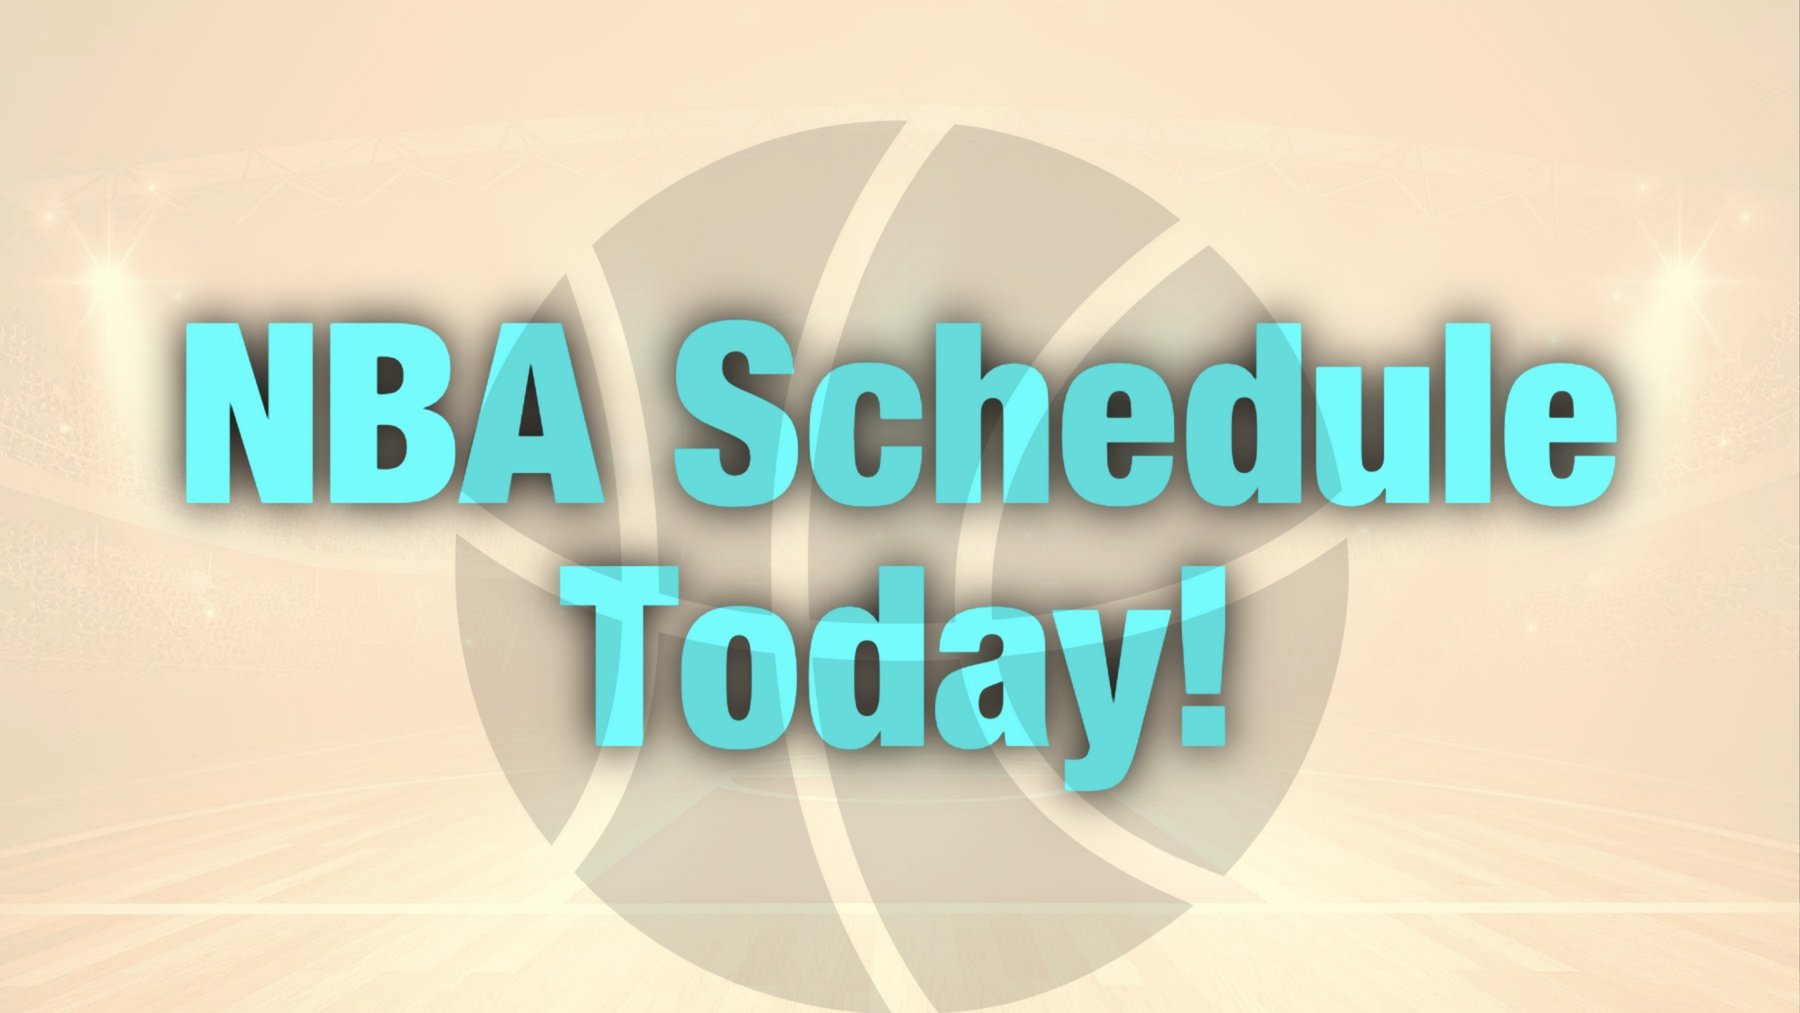 Watch the NBA schedule today